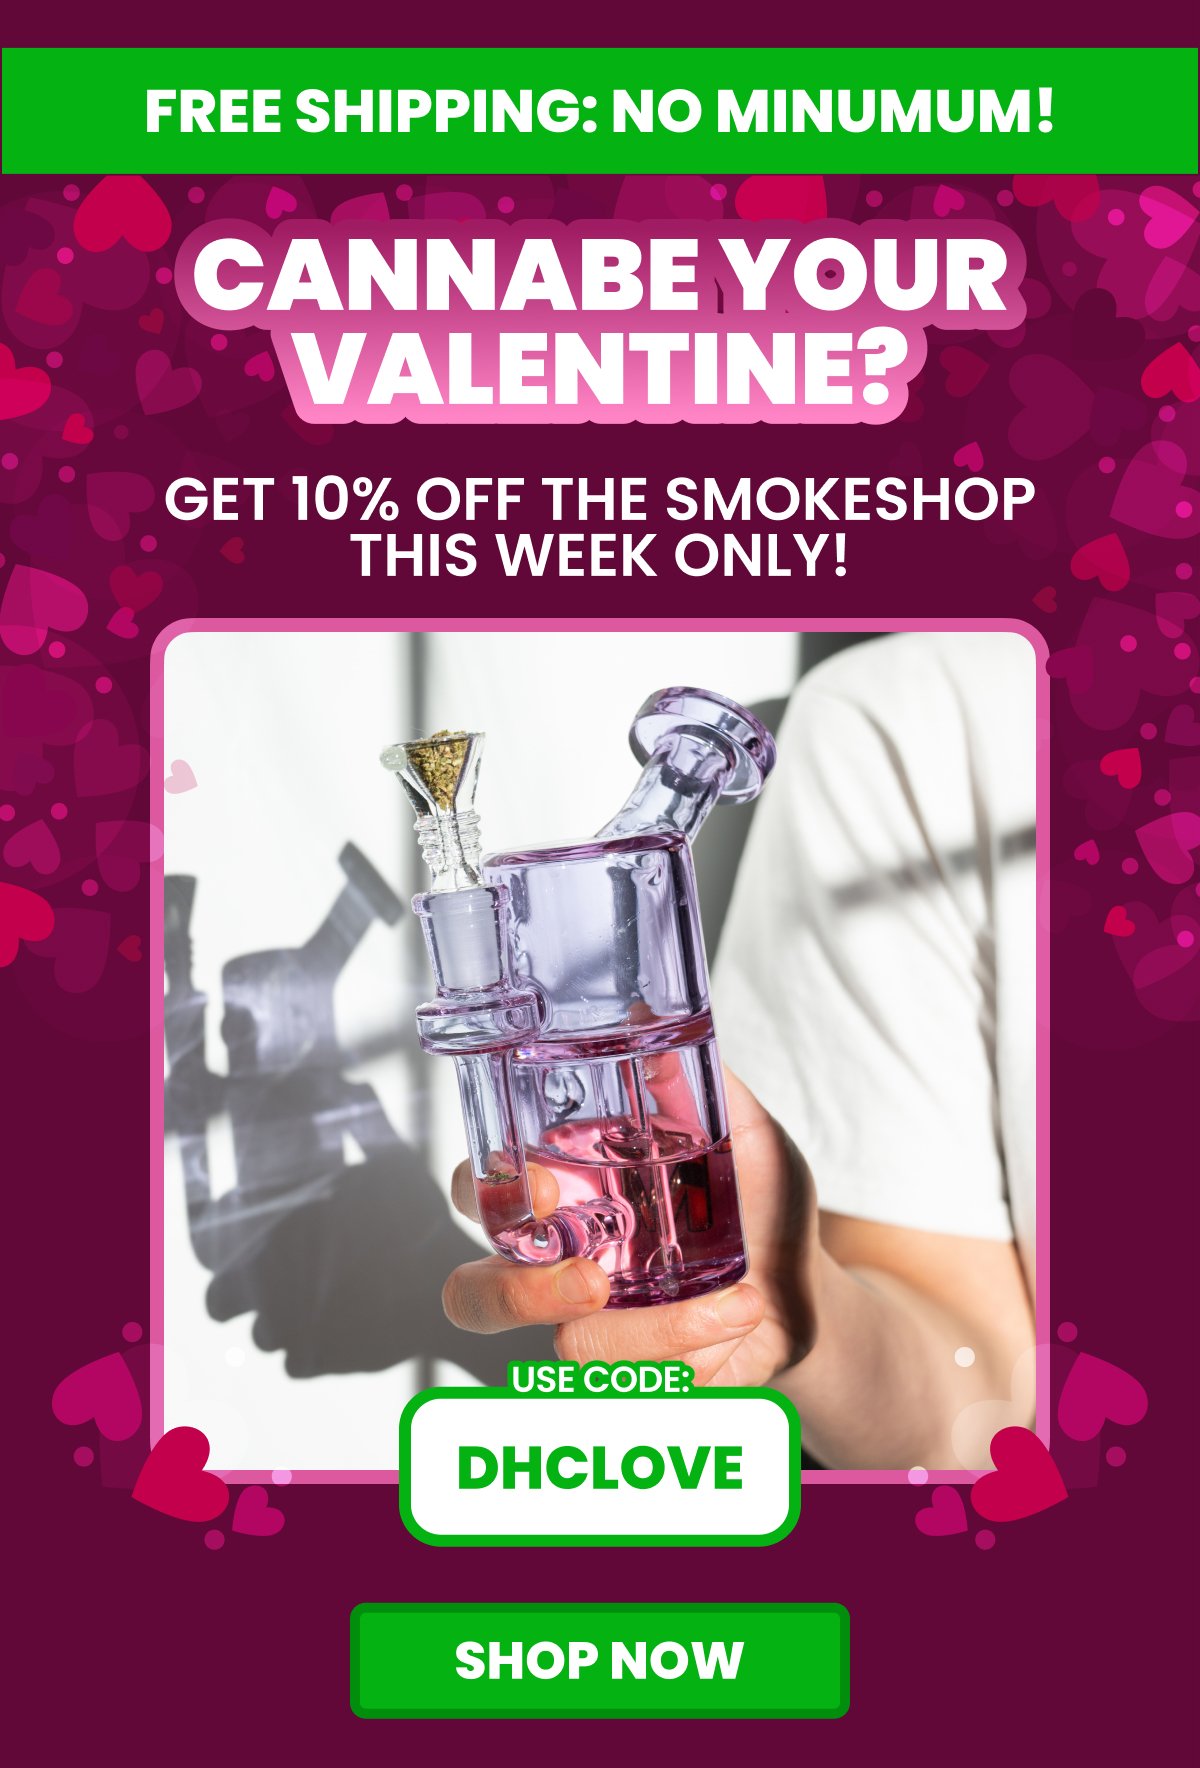 CANNABE YOUR VALENTINE? GET 10% OFF THE SMOKESHOP THIS WEEK ONLY!